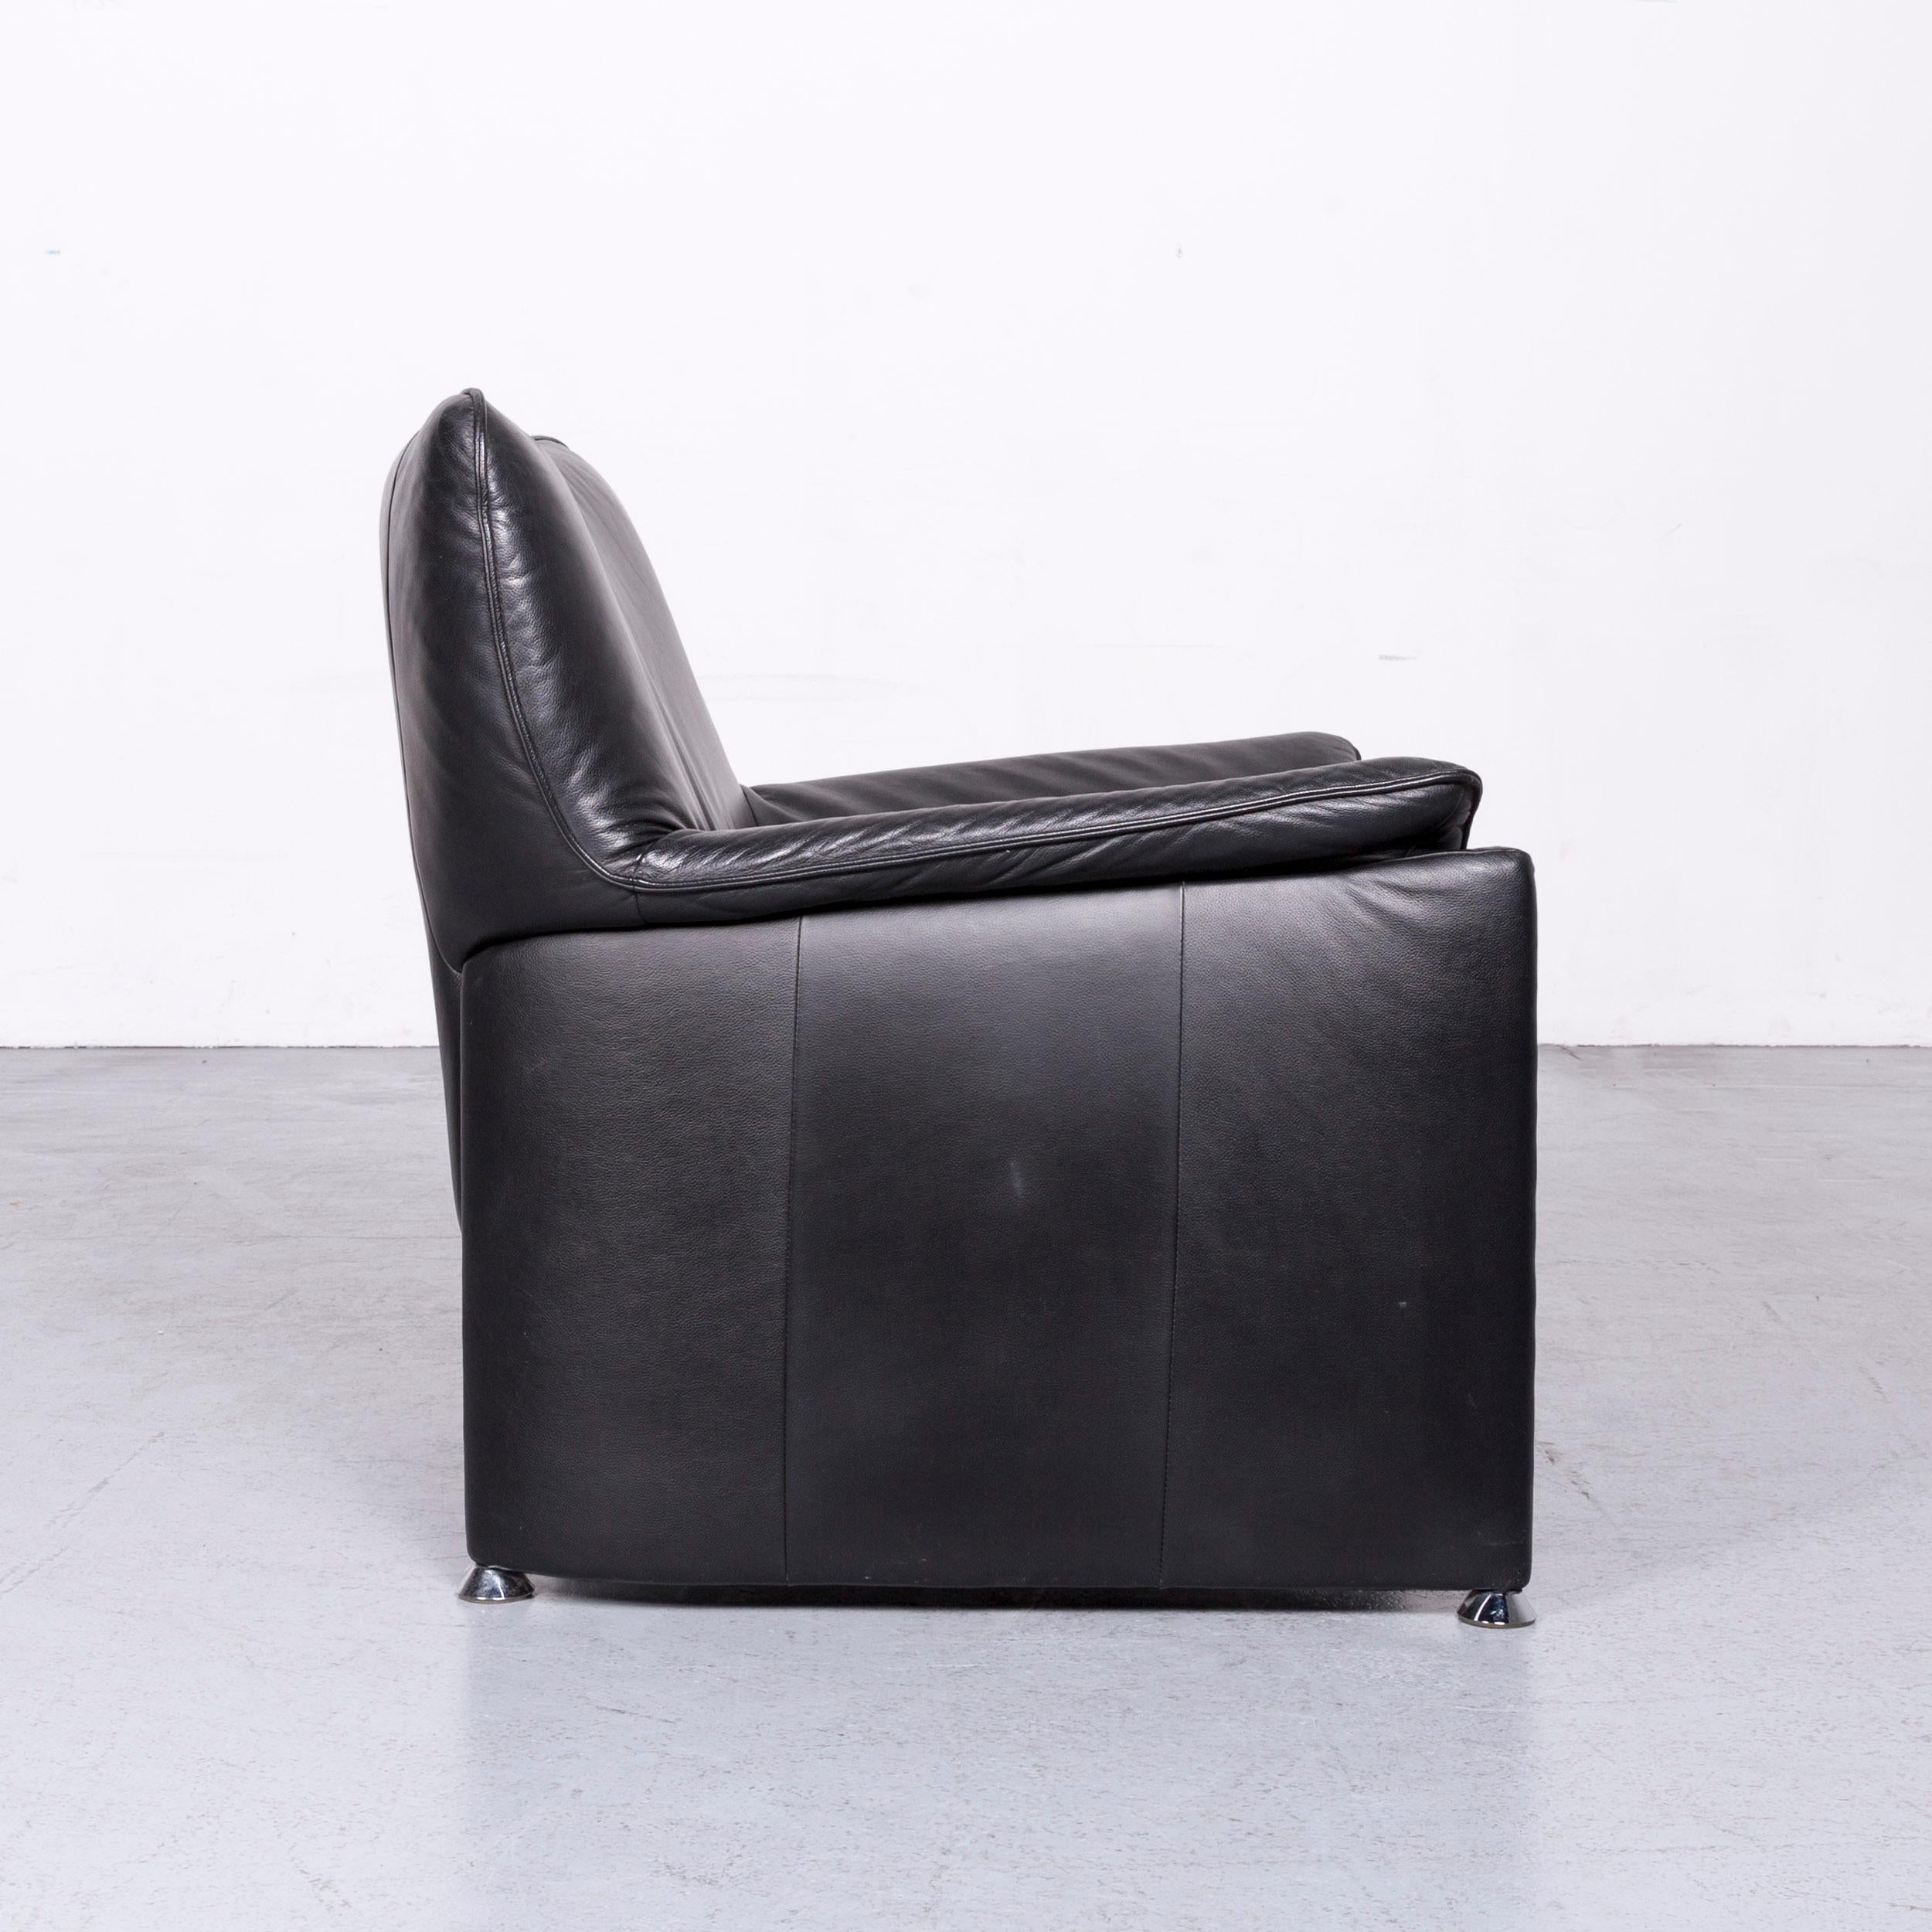 Contemporary Laauser Flair Designer Leather Armchair Black One-Seat Couch